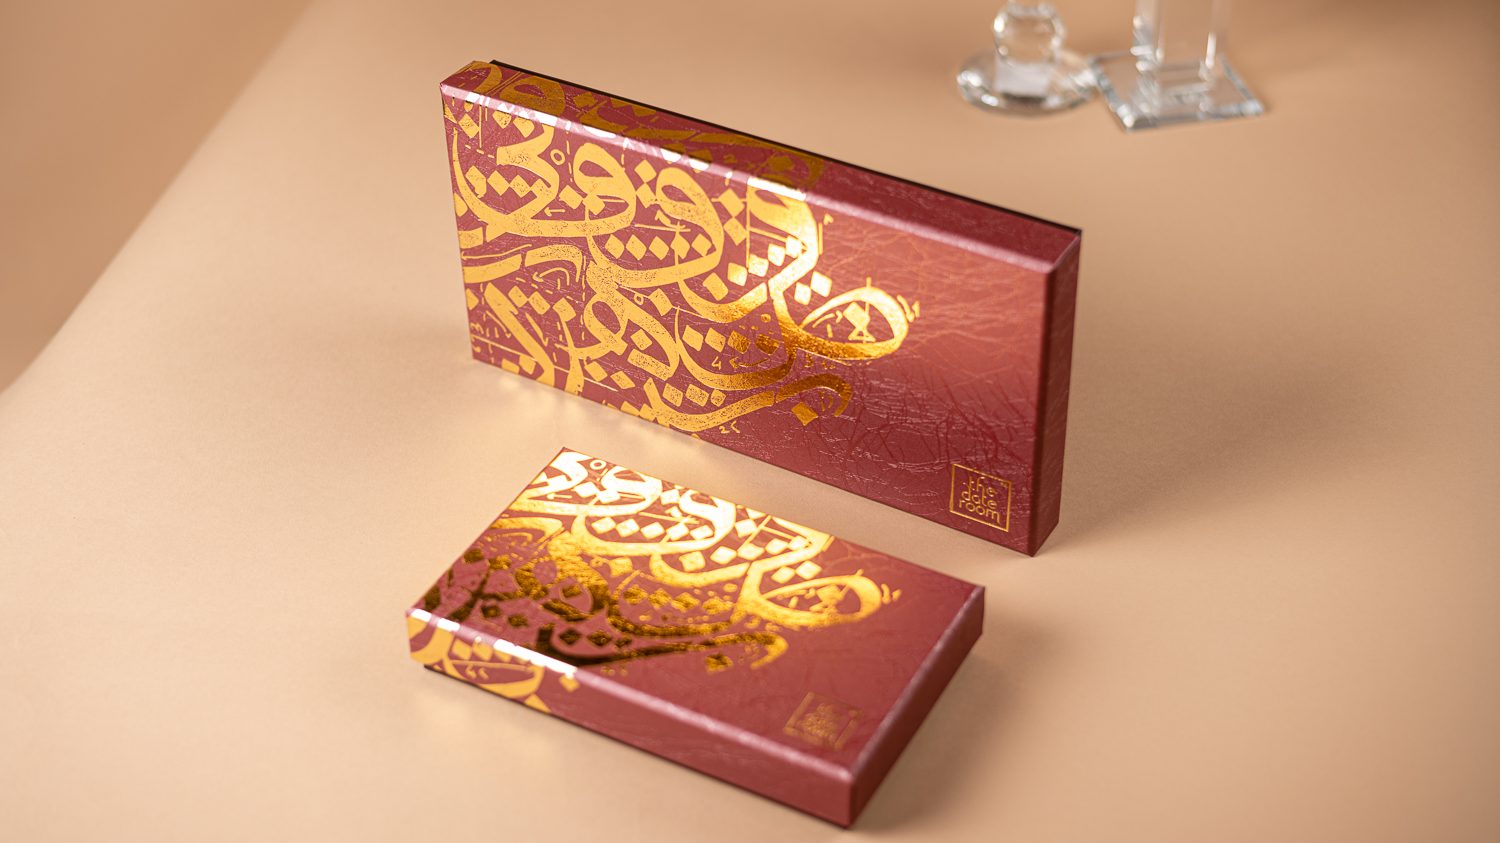 Elegant Gift Boxes by The Date Room - Corporate Gifts Suppliers in Dubai